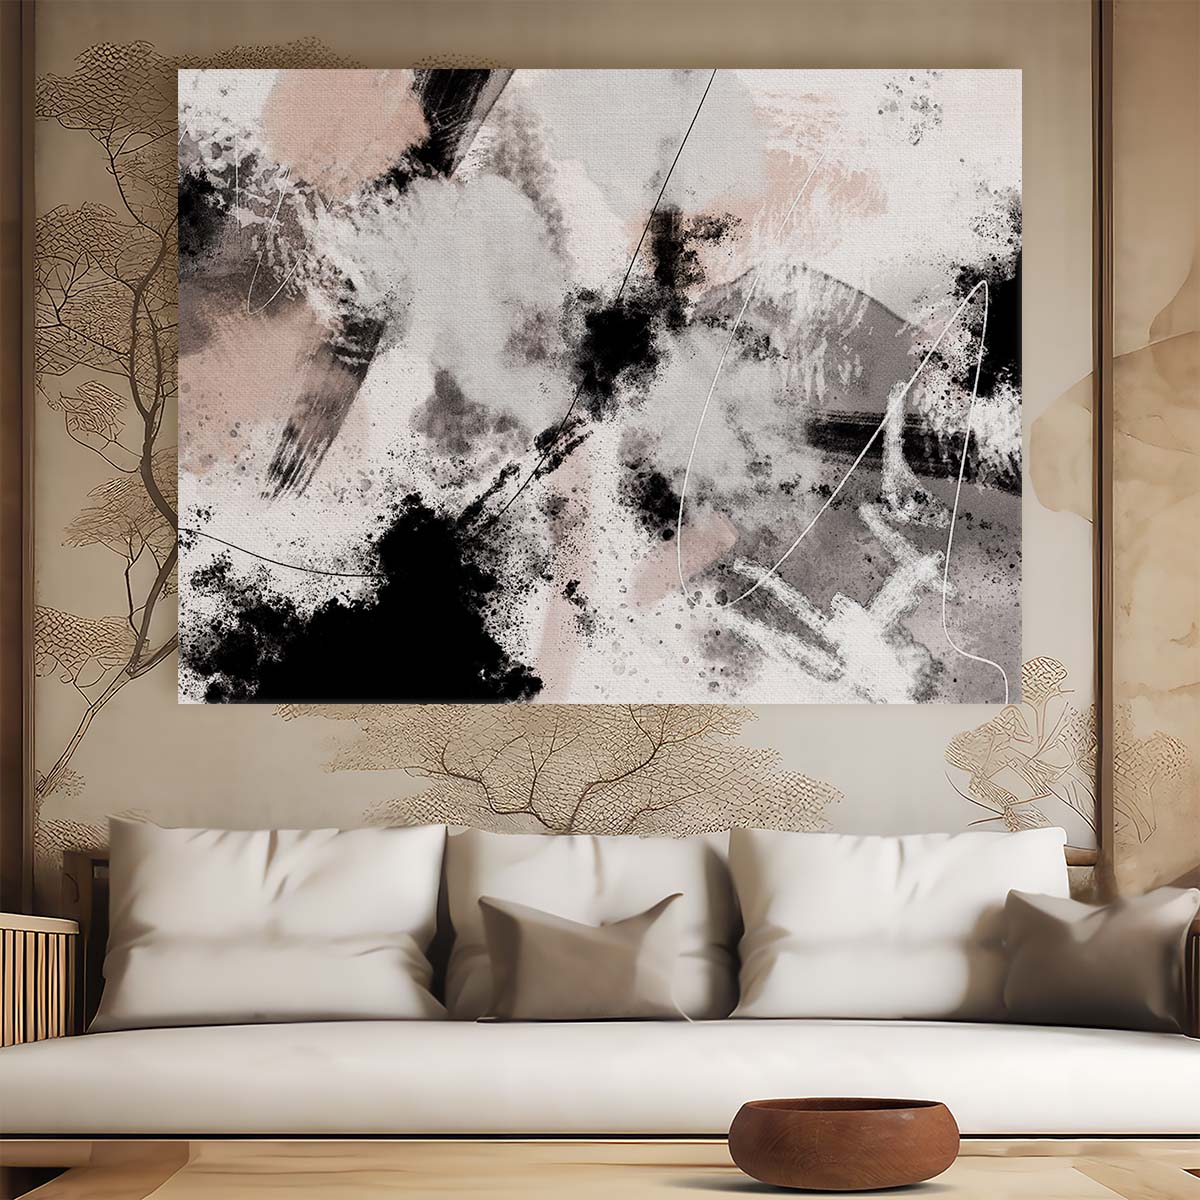 Color Splash Abstract Geometric Canvas Painting Wall Art by Luxuriance Designs. Made in USA.